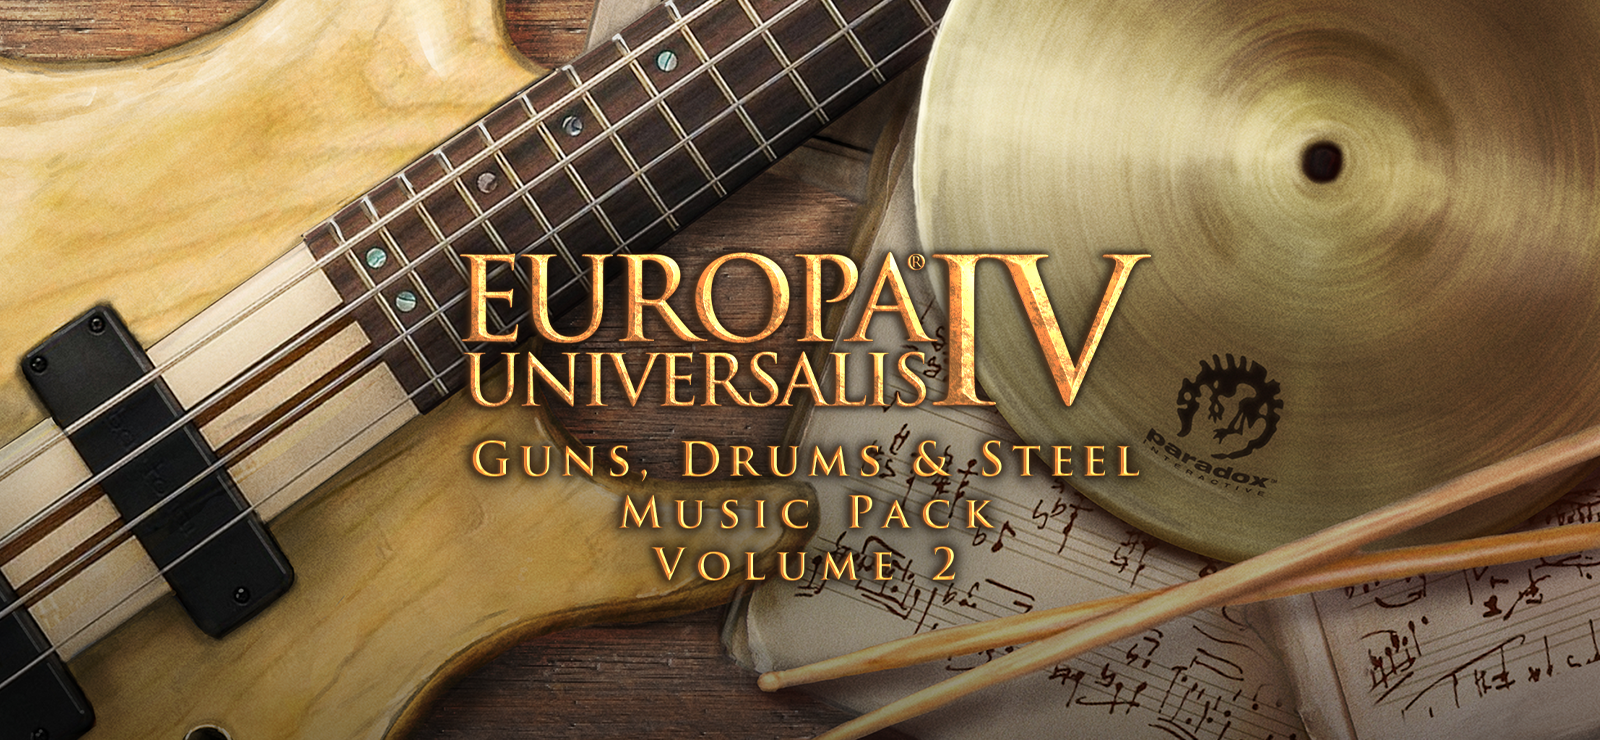 Europa Universalis IV: Guns, Drums And Steel Volume 2 Music Pack